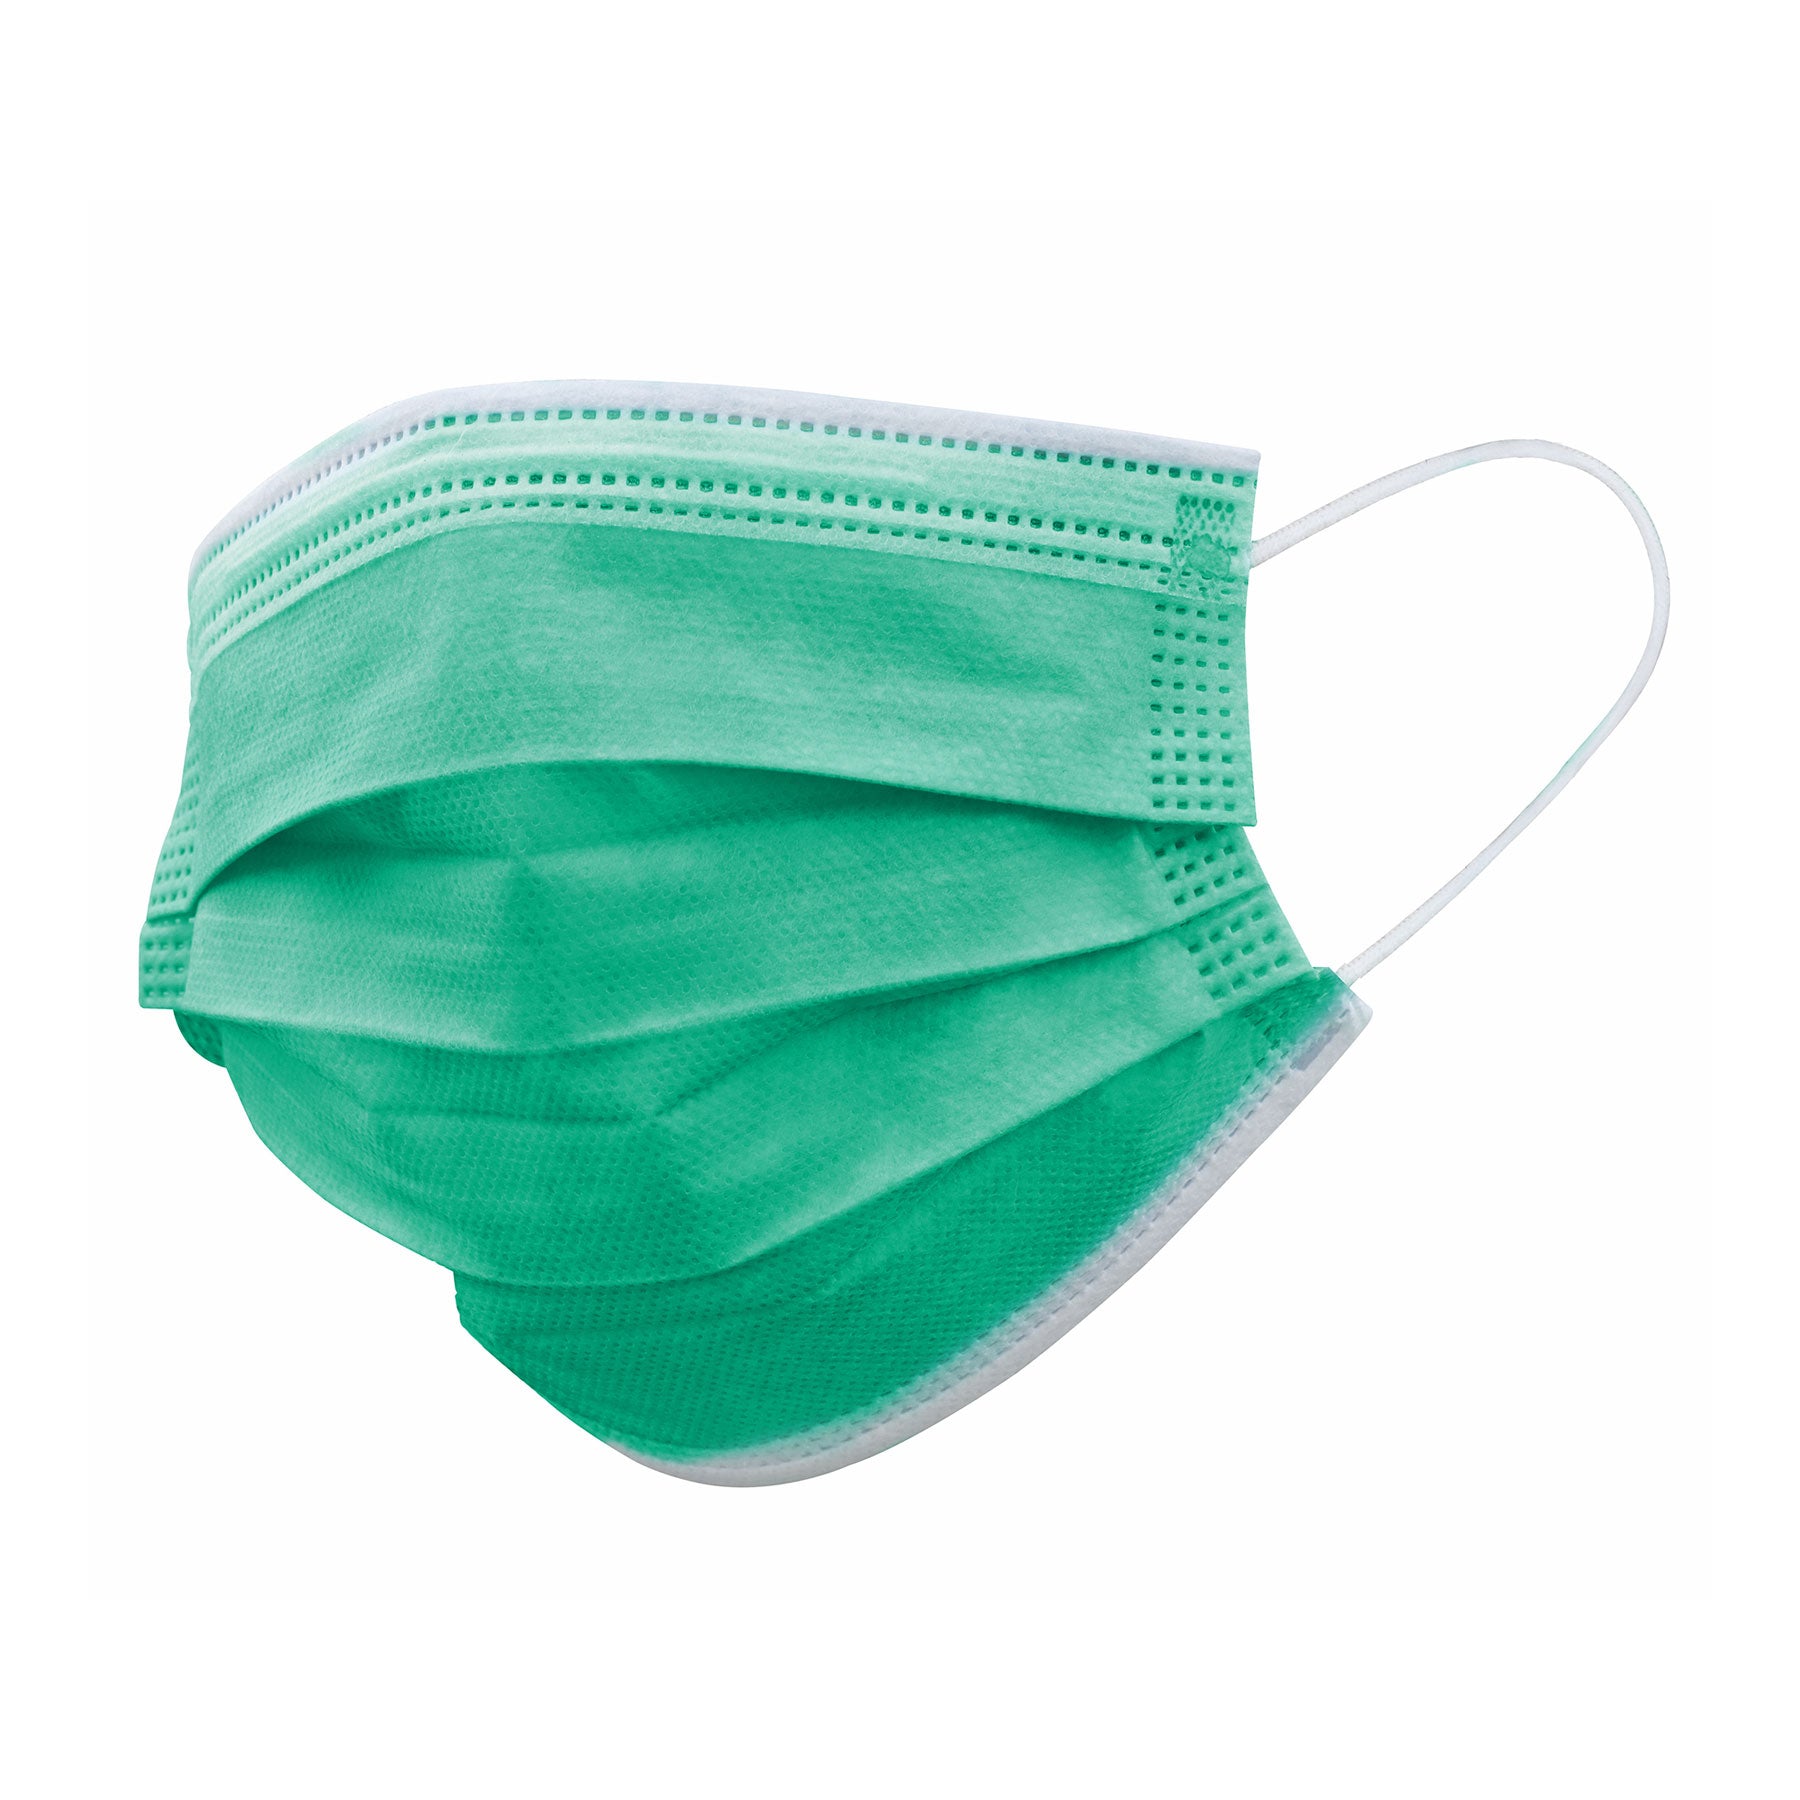 Airguardz Level 3 Green Surgical Mask 3-ply ASTM - Made in Canada